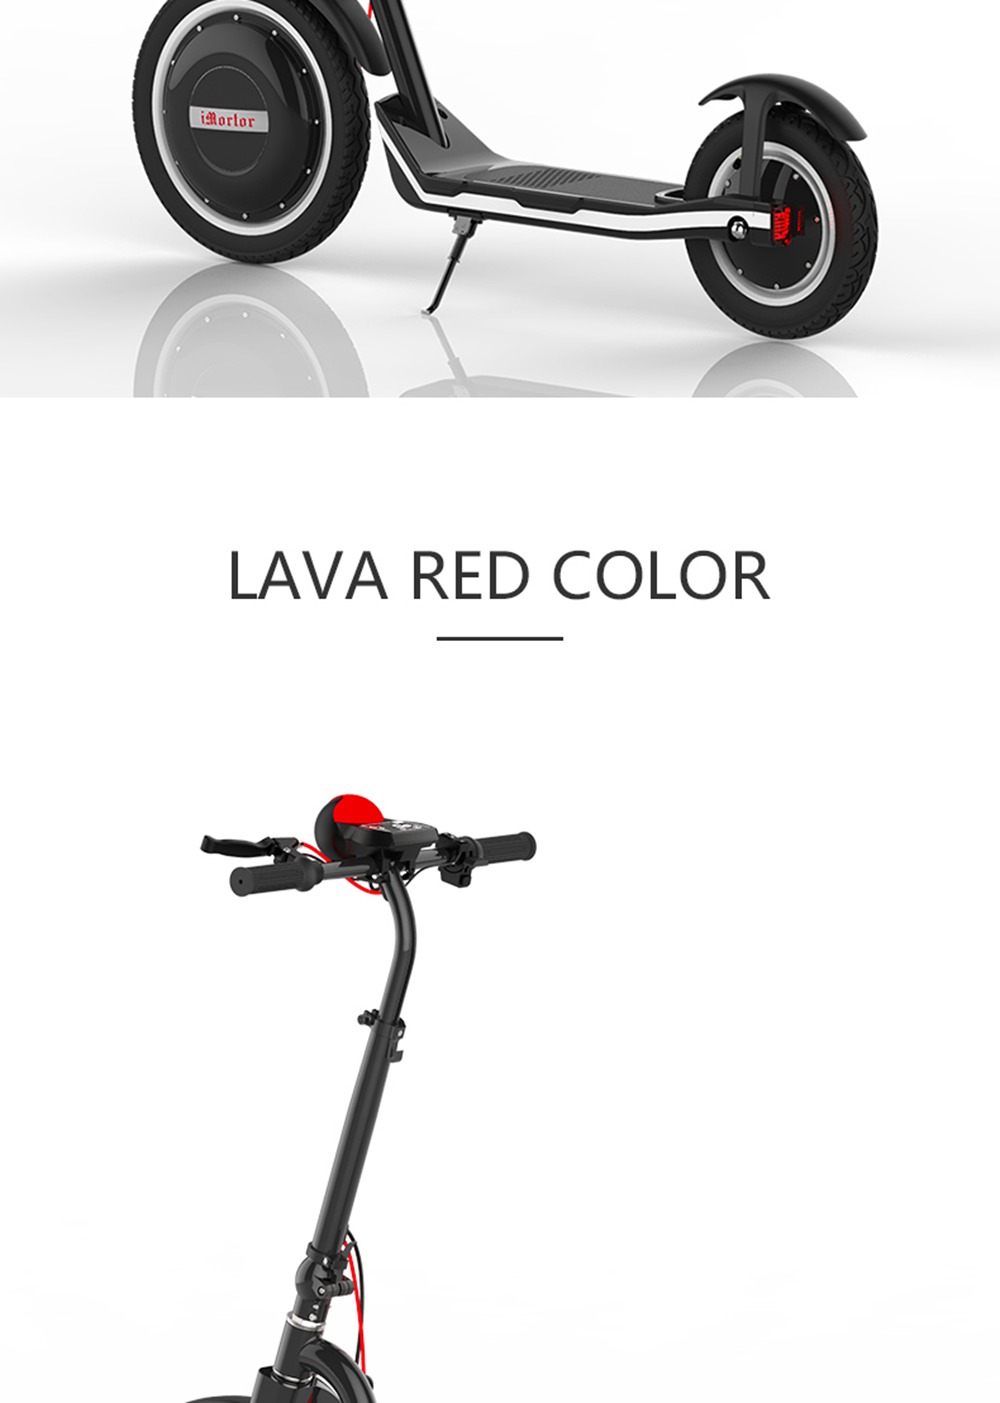 iMortor C1 Foldable Off-road Electric Scooter 350W Motor Max 30km/h 9.6Ah Battery16 Inch Pneumatic Tire - RED